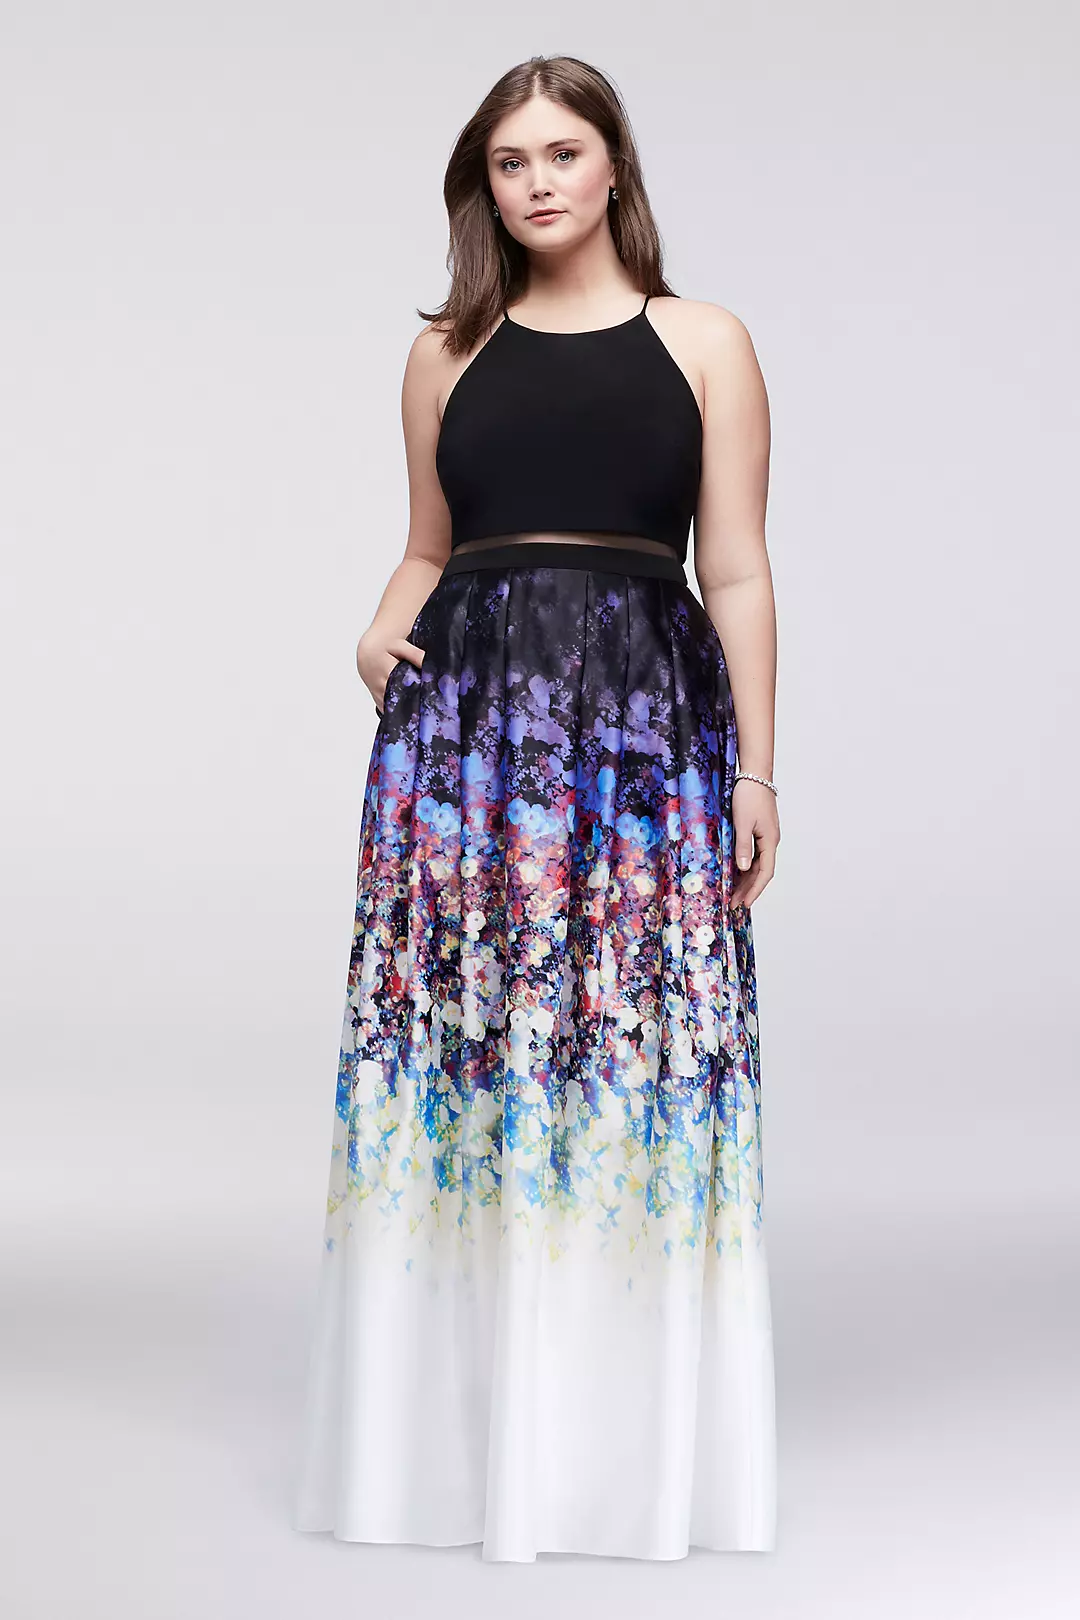 Faux Two-Piece Halter Dress with Floral Skirt Image